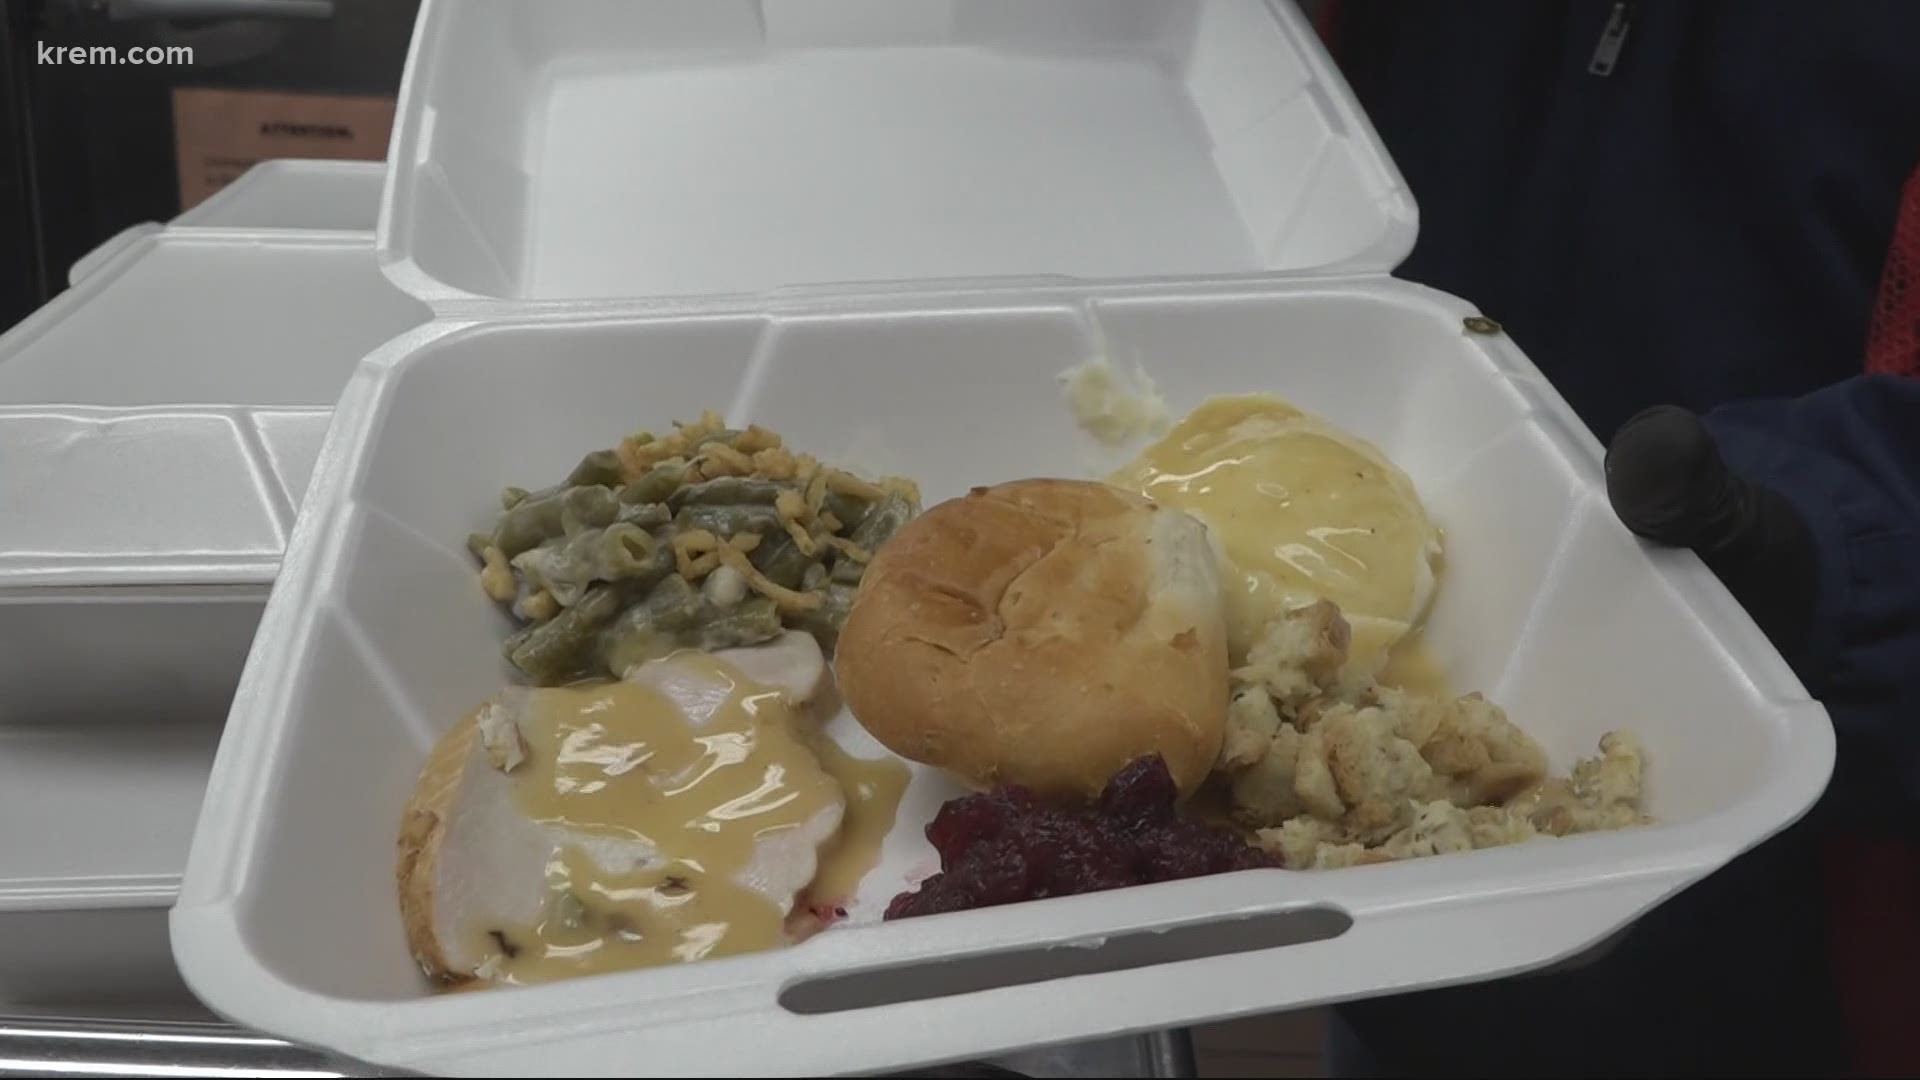 The charity held a drive-thru food drive to give community members a hot Thanksgiving meal.